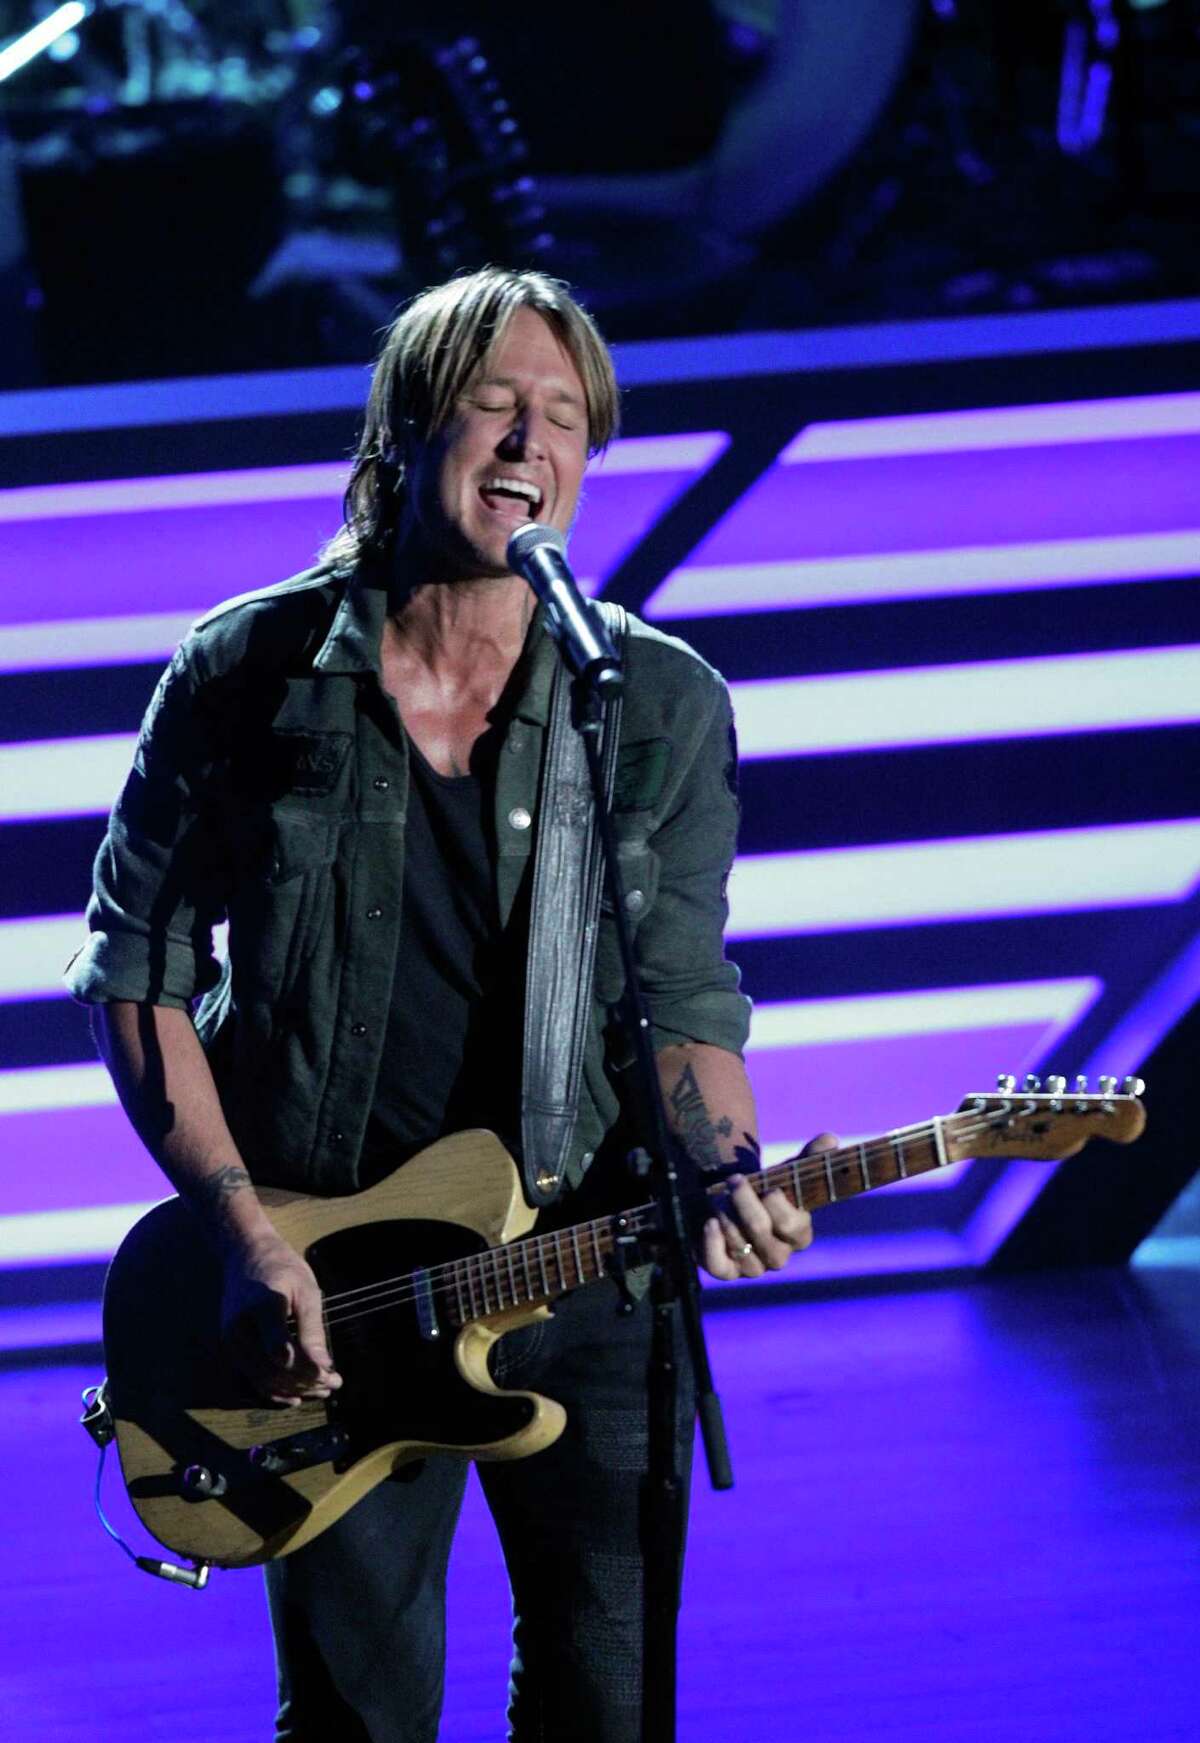 Keith Urban performs at the 10th Annual ACM Honors at Ryman Auditorium Tuesday, Aug. 30, 2016, in Nashville, Tenn. (Photo by Wade Payne/Invision/AP)